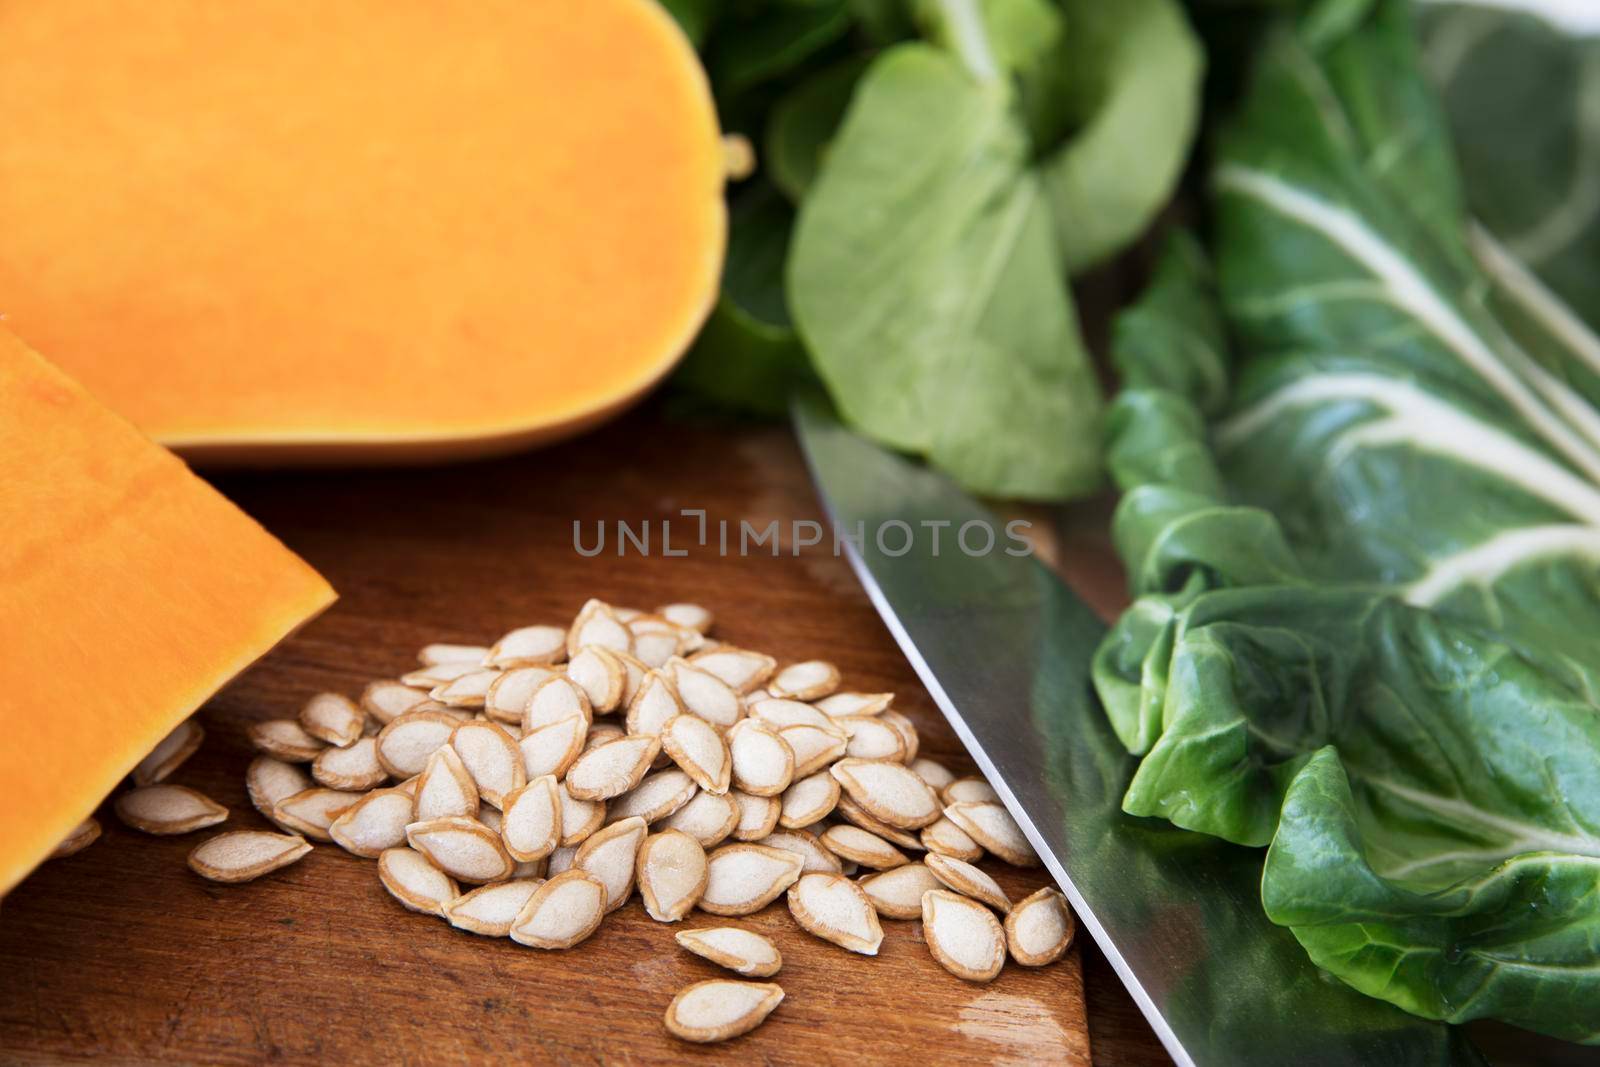 Butternut squash seeds on a cutting board with a knife, pieces of butternut squash and chard.